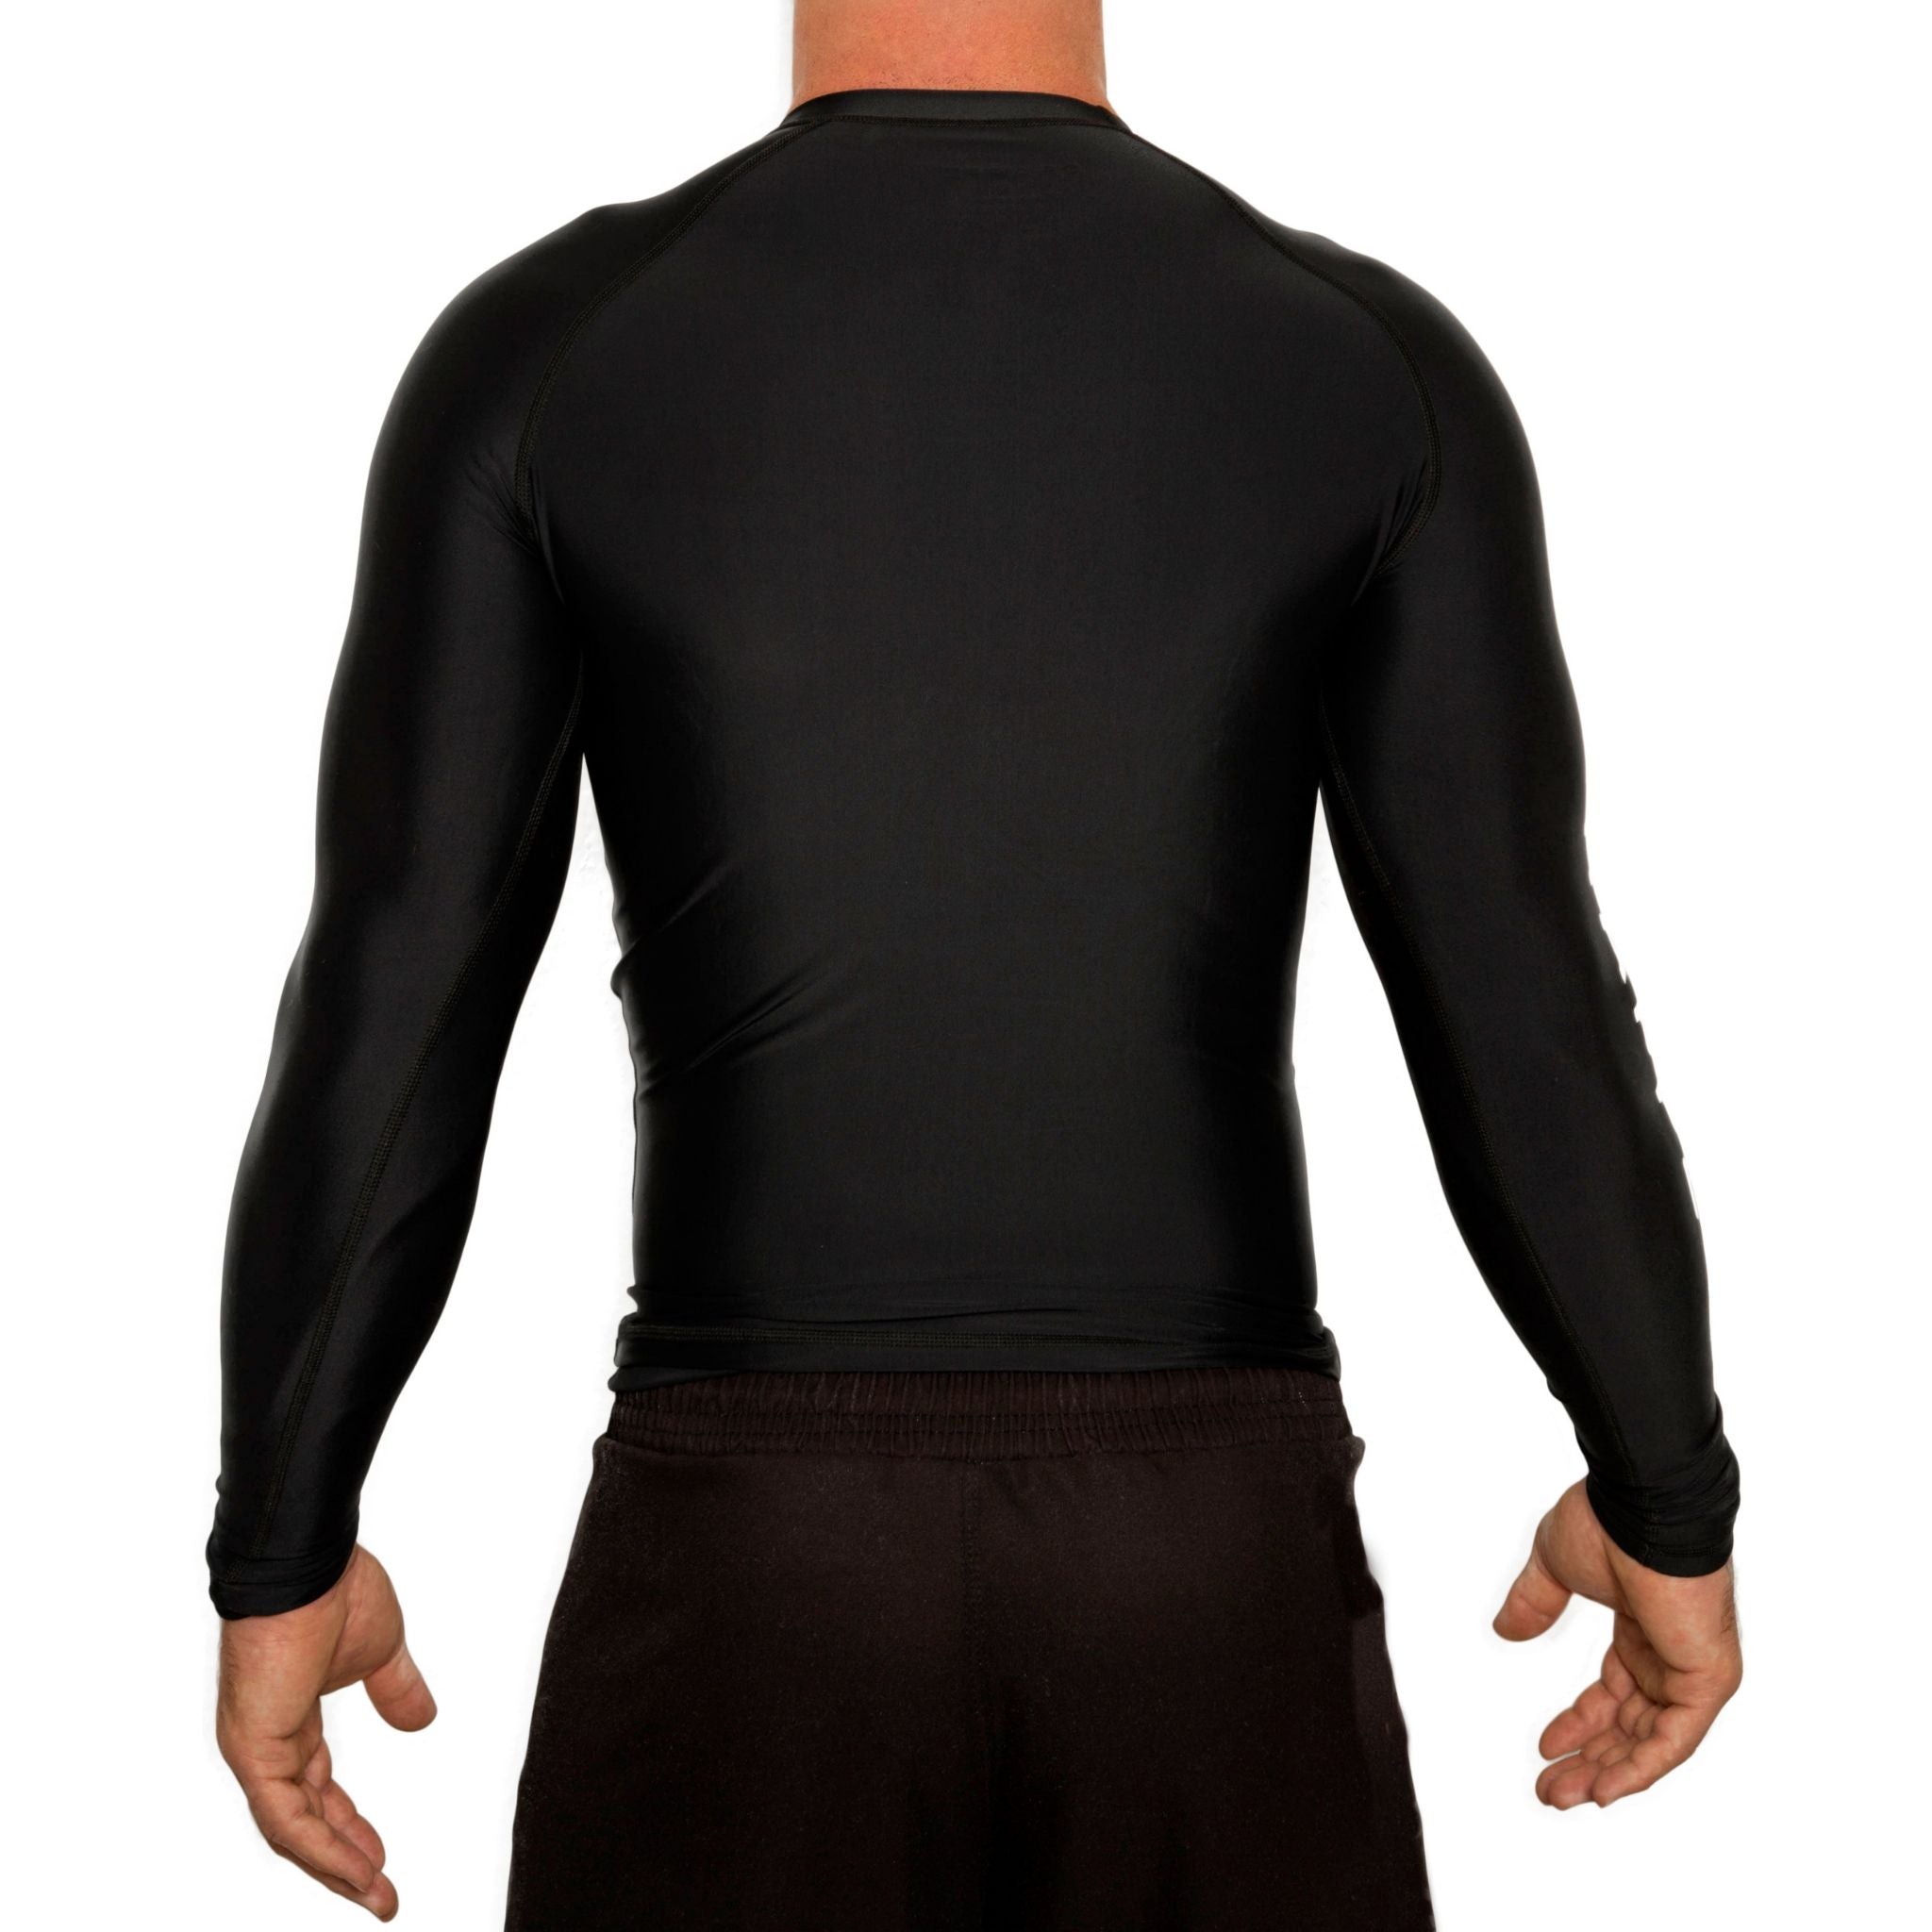 Rashguard - Long Sleeve Athletic Compression Shirt - Base layer - By Grappz  - X-Small